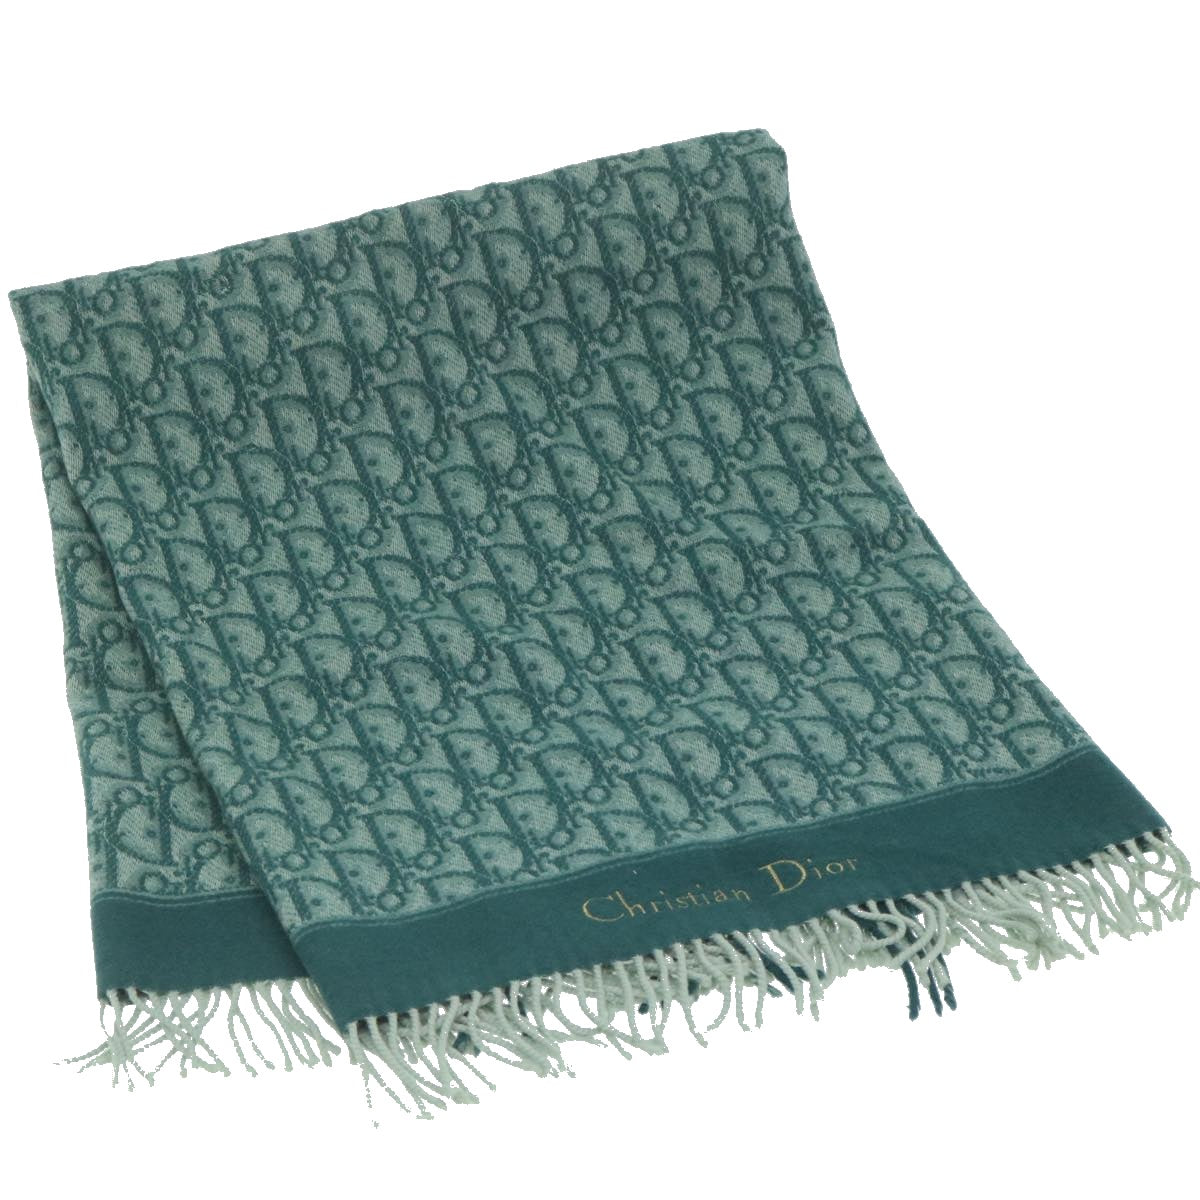 Christian Dior Trotter Canvas Lap Blanket Towel Green Auth am5307